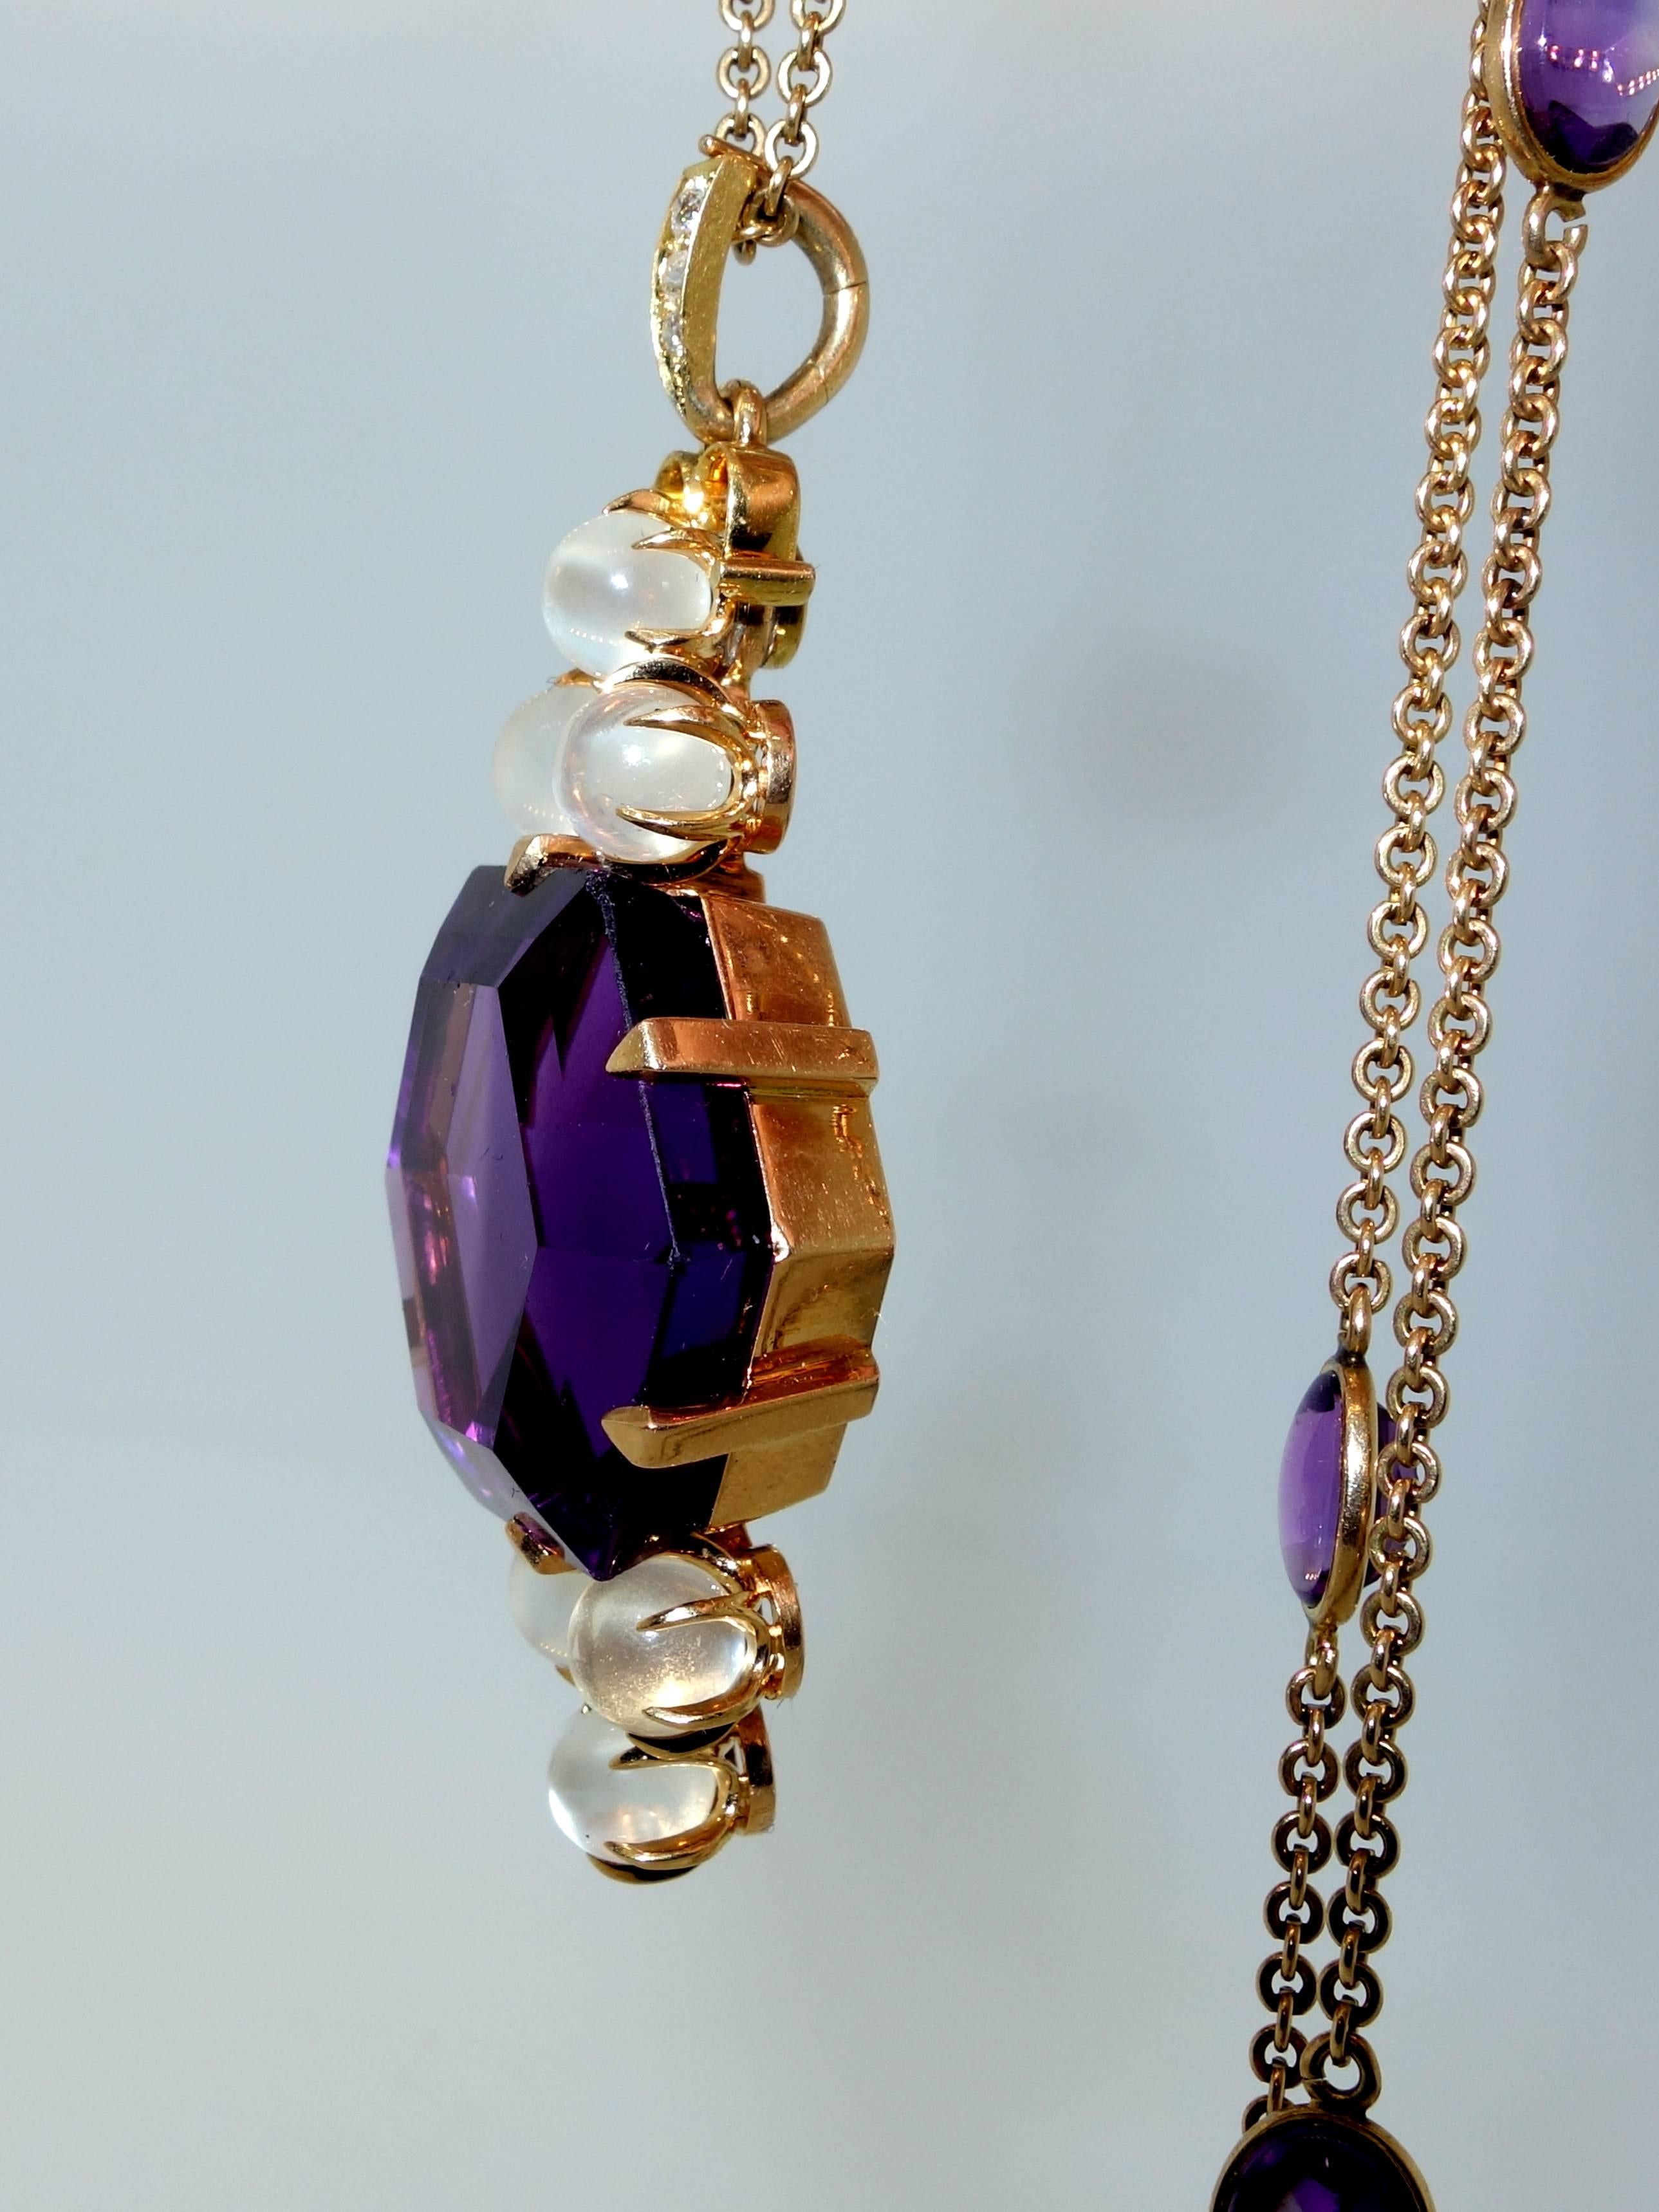 Classic Victorian necklace with approximately 20 ct. hexagonal fine amethyst (probably Siberian based on it's fine deep purple color), accented with moonstones.  The chain is interspersed with 6 amethysts.  The necklace is 14K gold and a total of 23